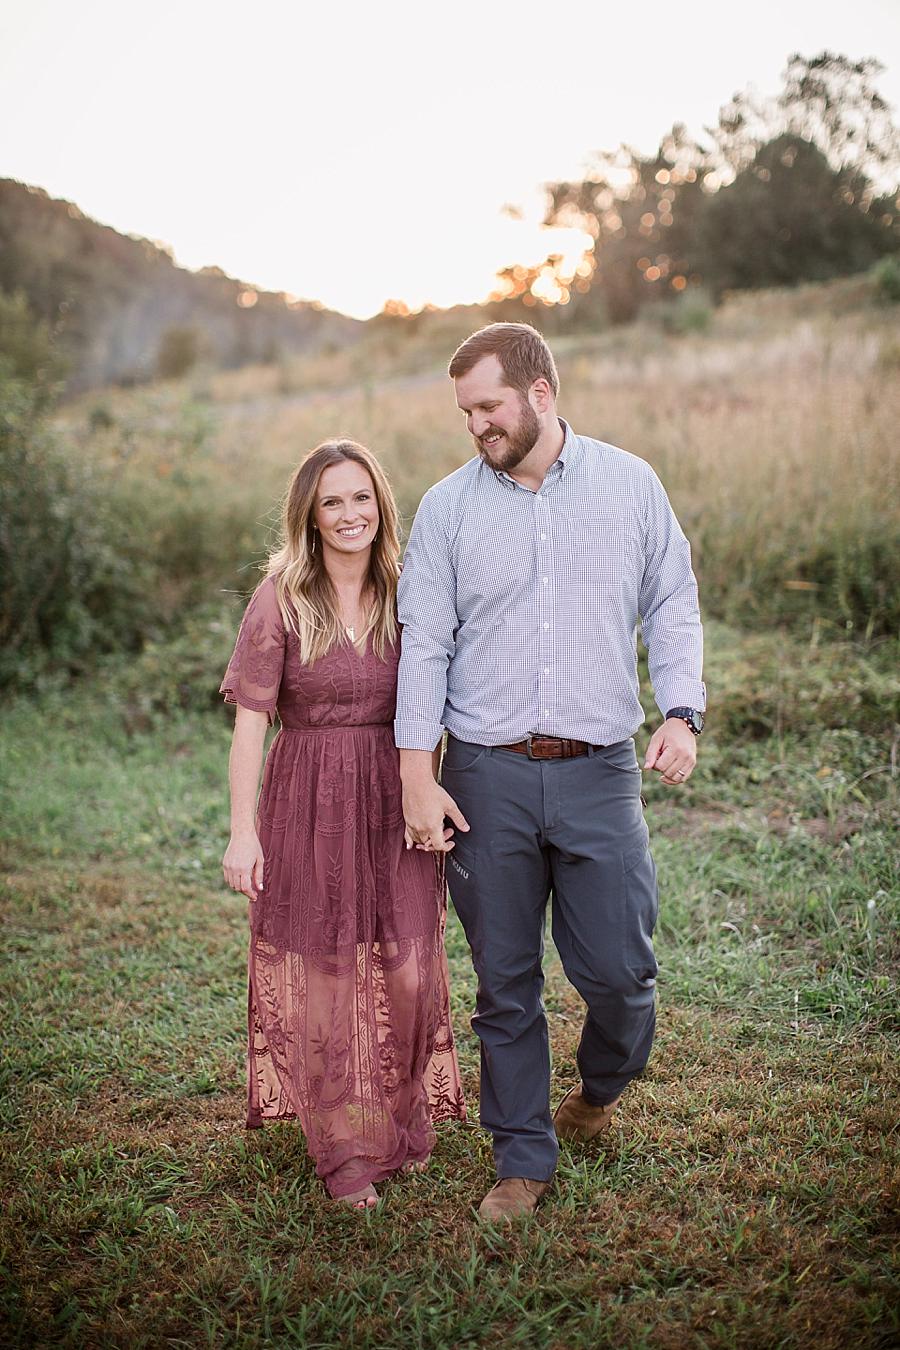 Strolling together at this Melton Hill Park Family Session by Knoxville Wedding Photographer, Amanda May Photos.